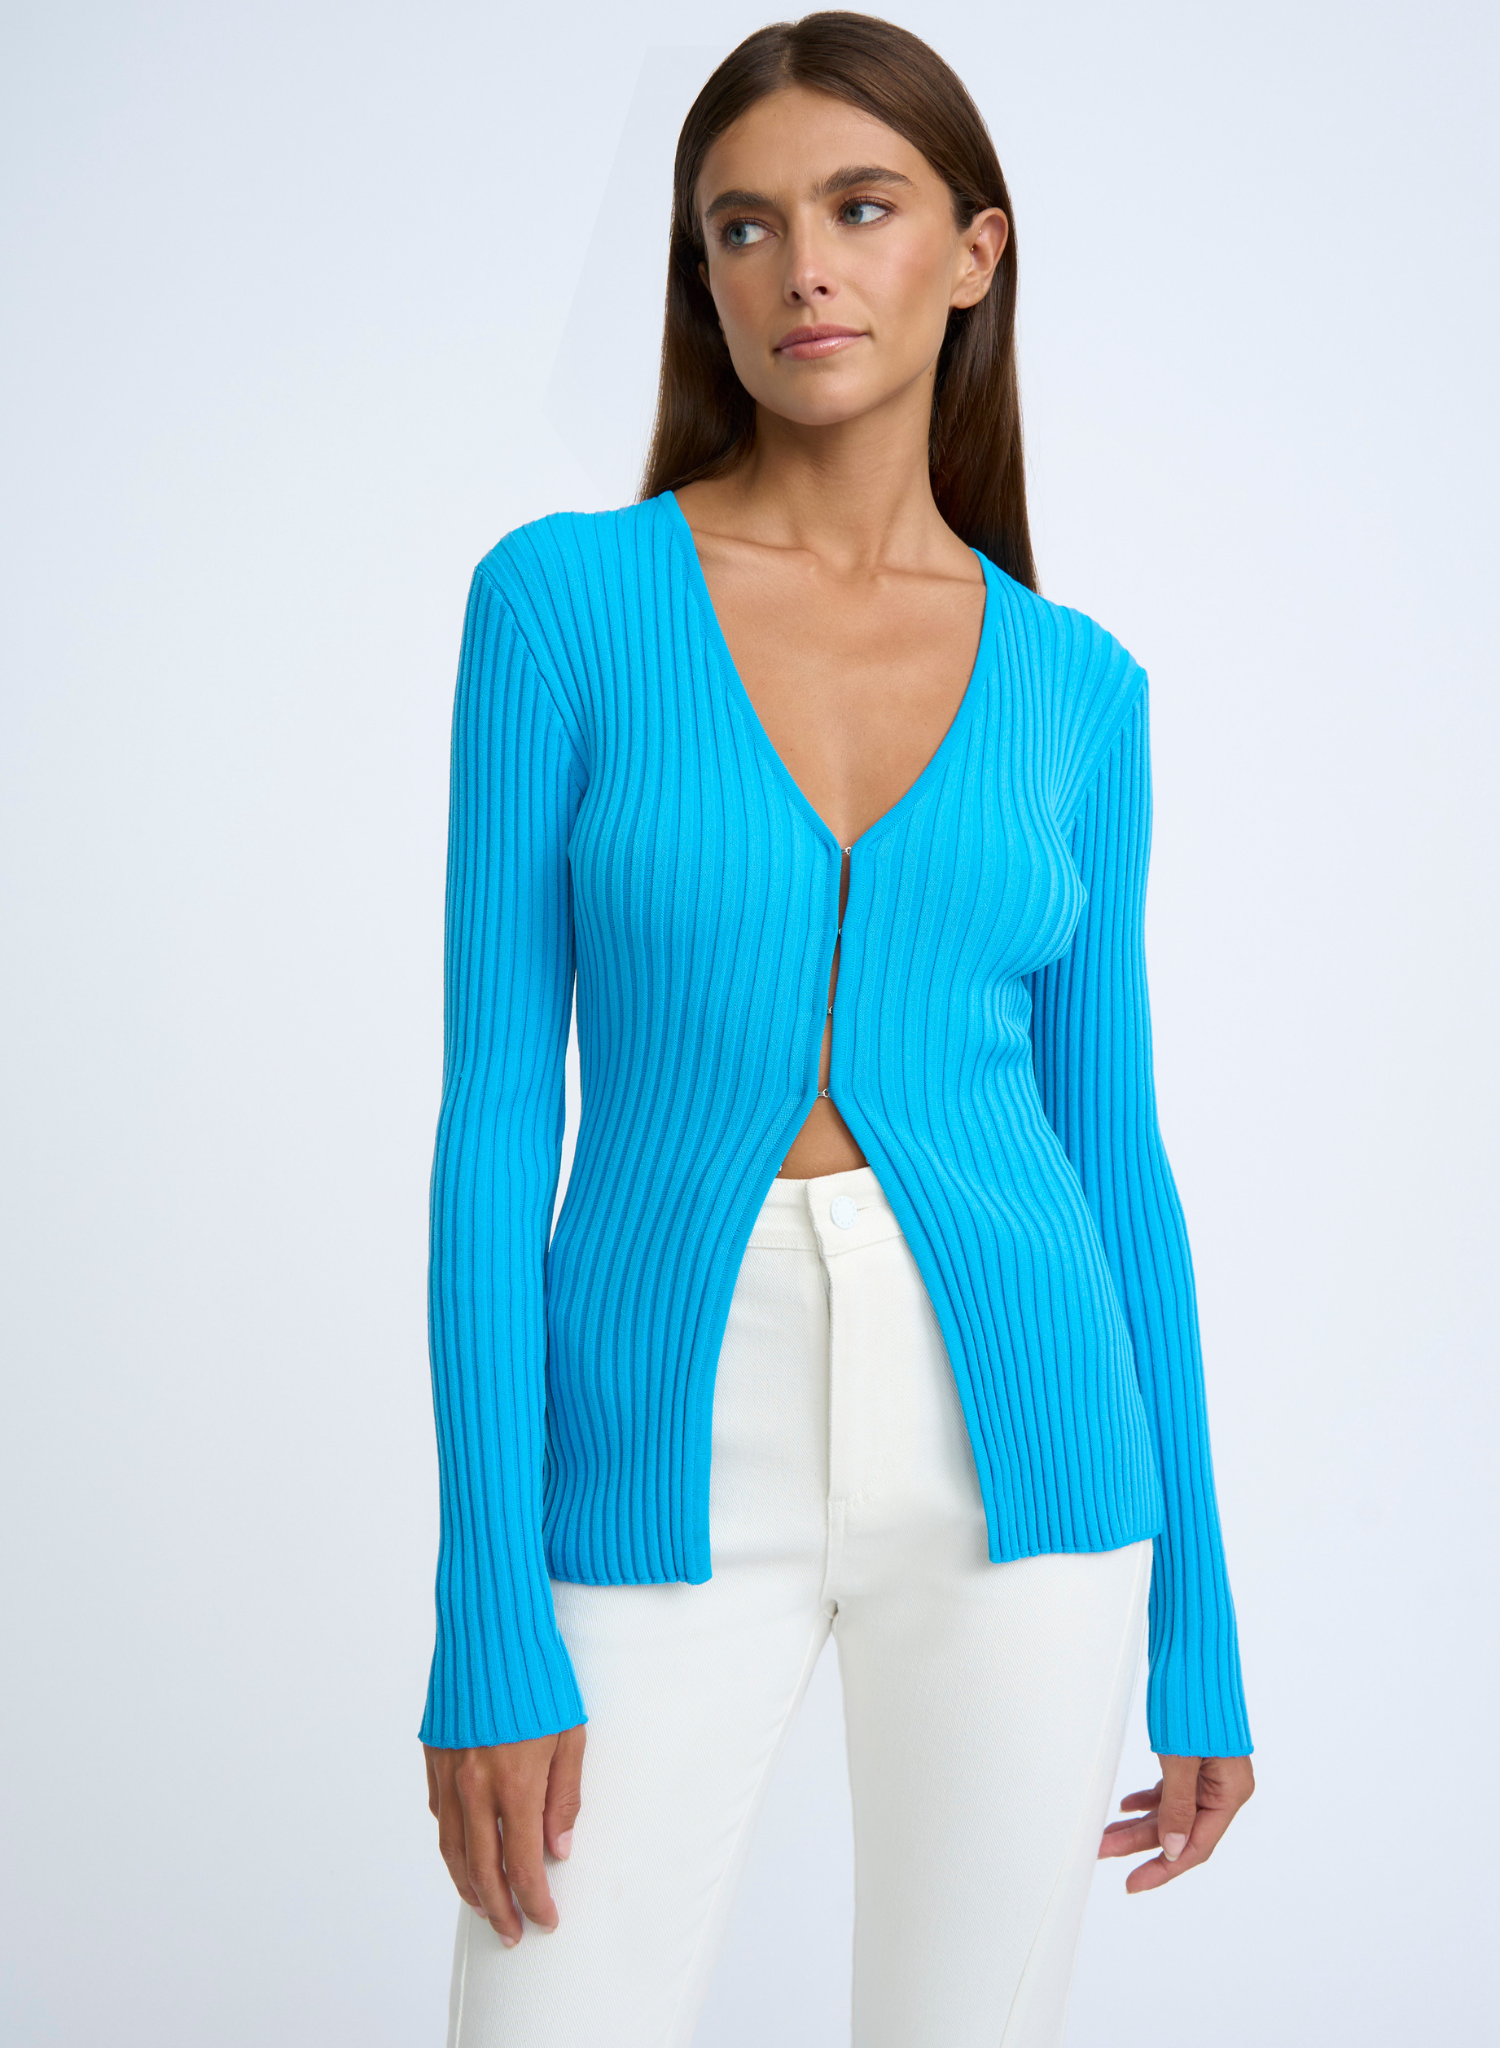 The Jenny Jayne Cardi brings fun and excitement into your winter wardrobe. Featuring a flattering v neckline with hook and eye closures down the centre front, this staple is crafted from a mid weight rib knit fabrication to make it the versatile layer for all year round.